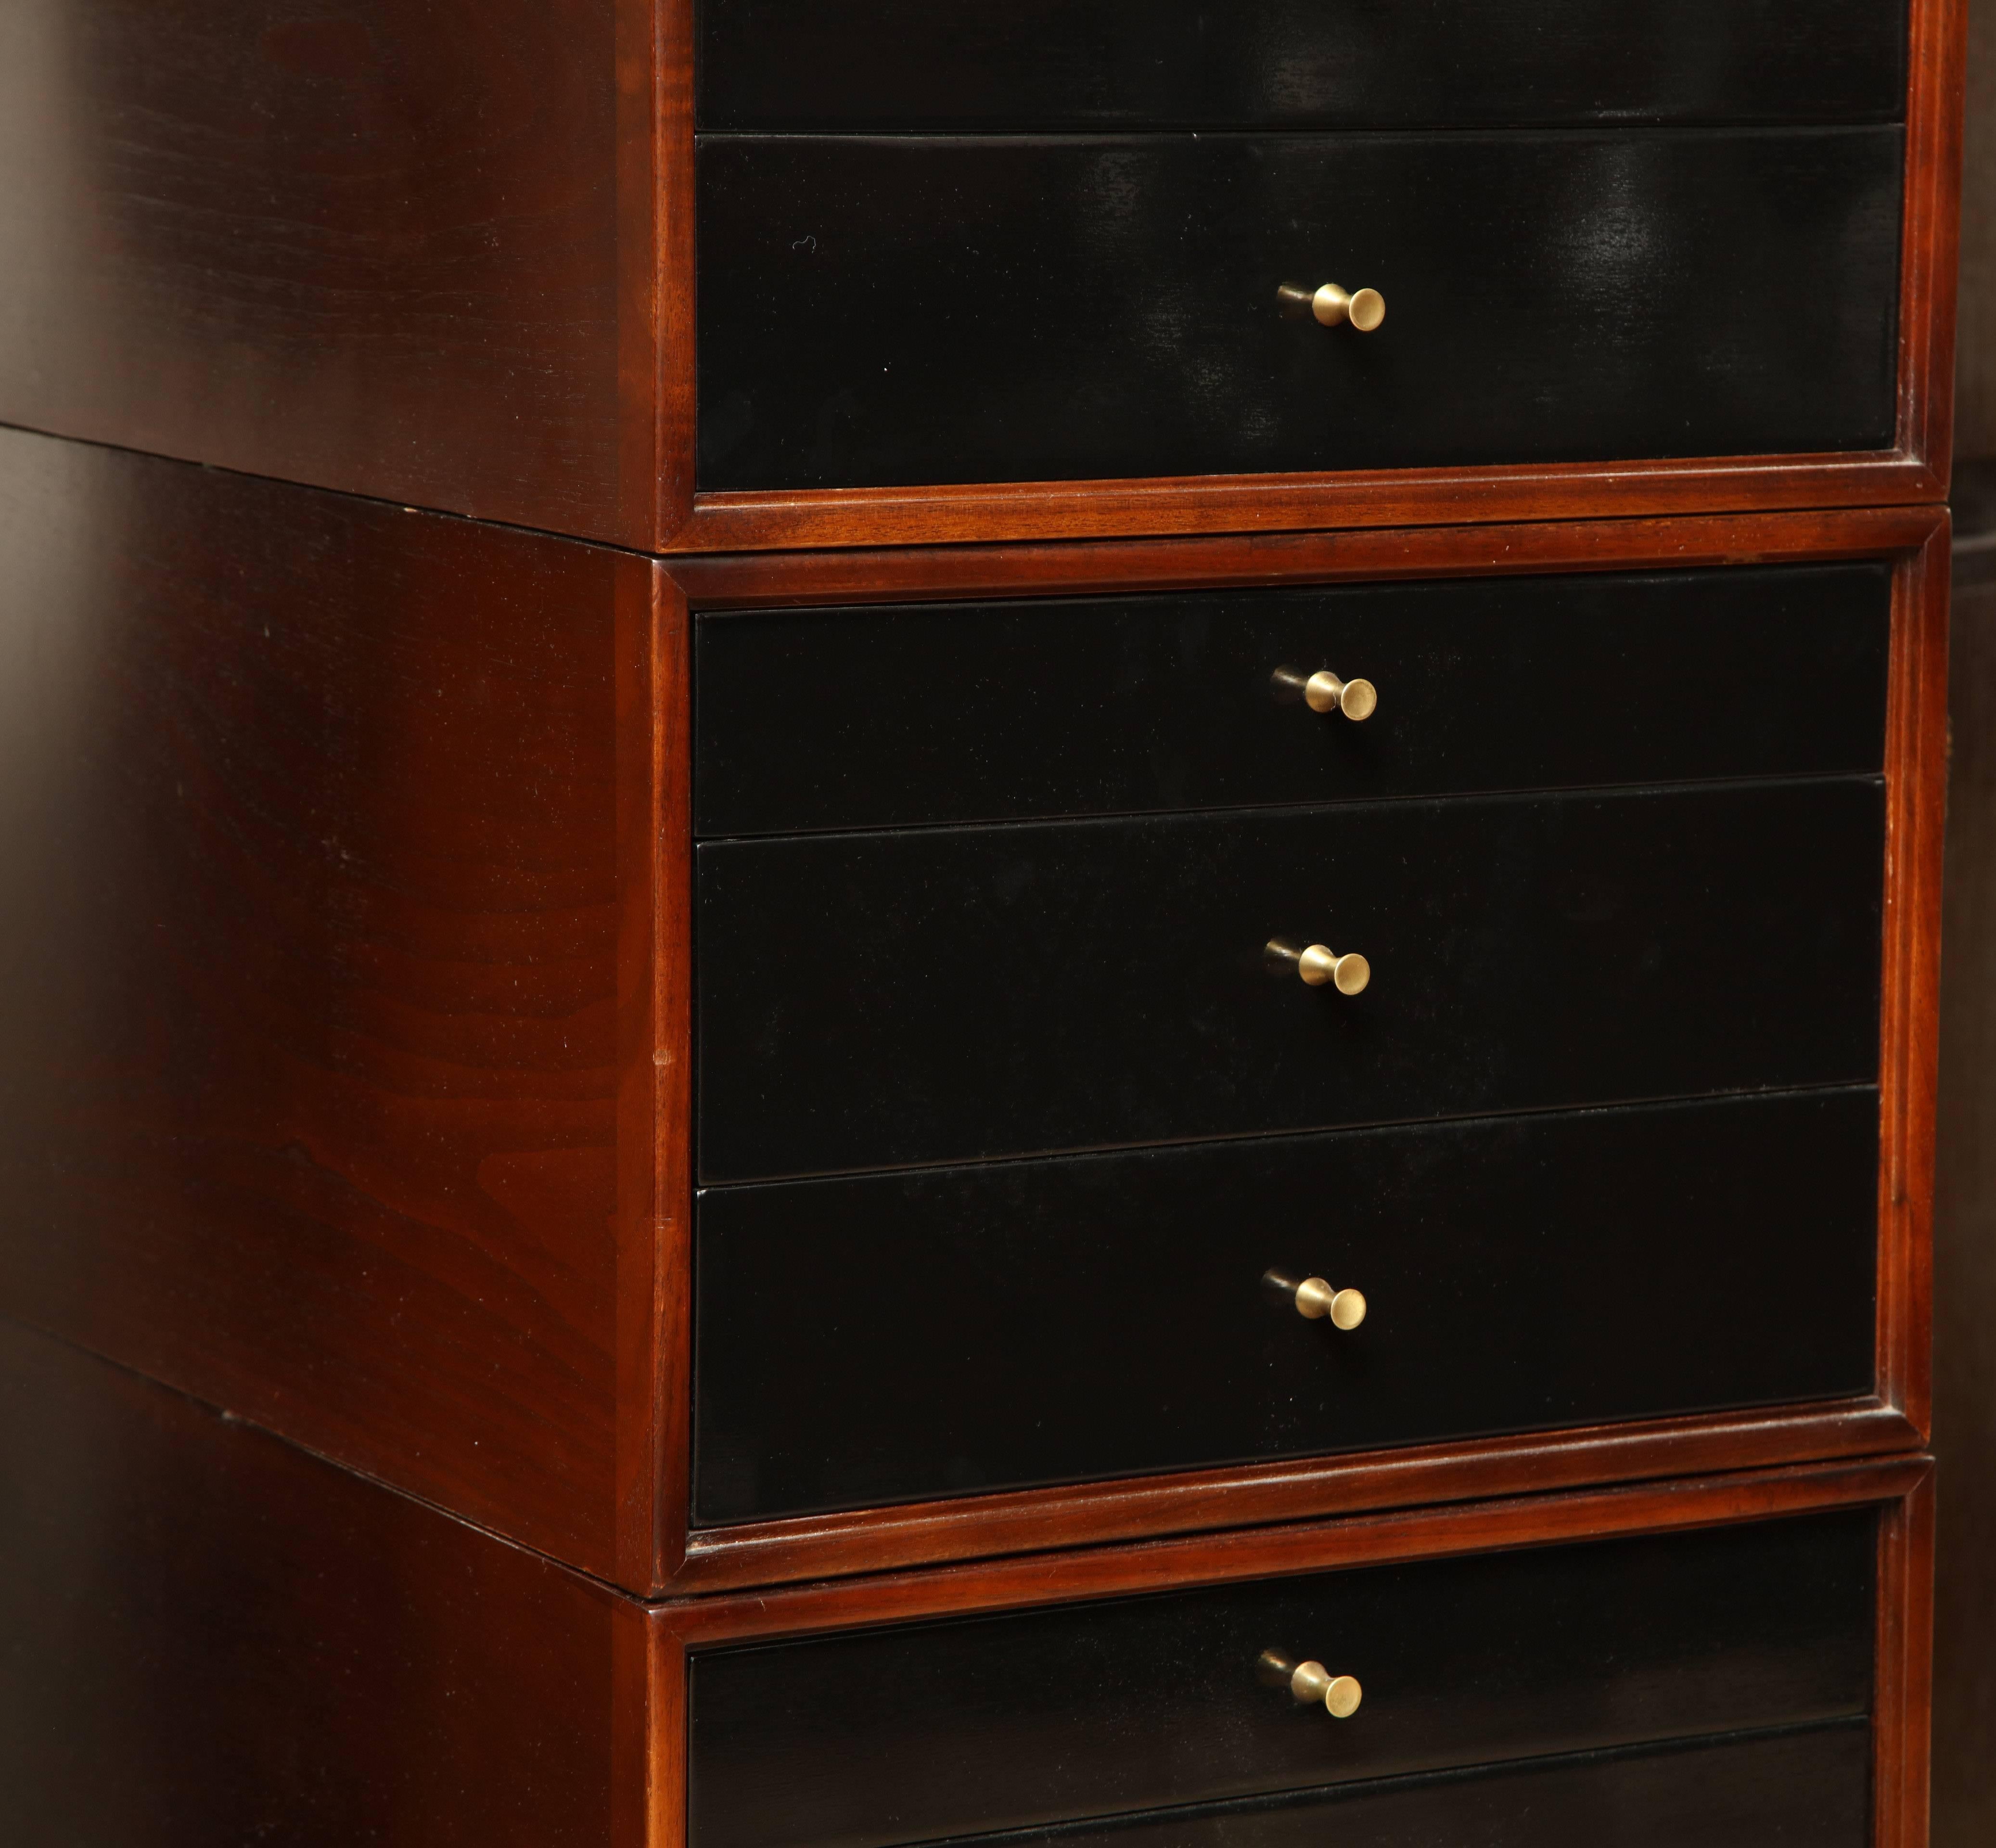 Modular nine-drawer chest in three parts by Mount Airy Furniture circa 1960 - sable finished with ebonized drawer fronts.